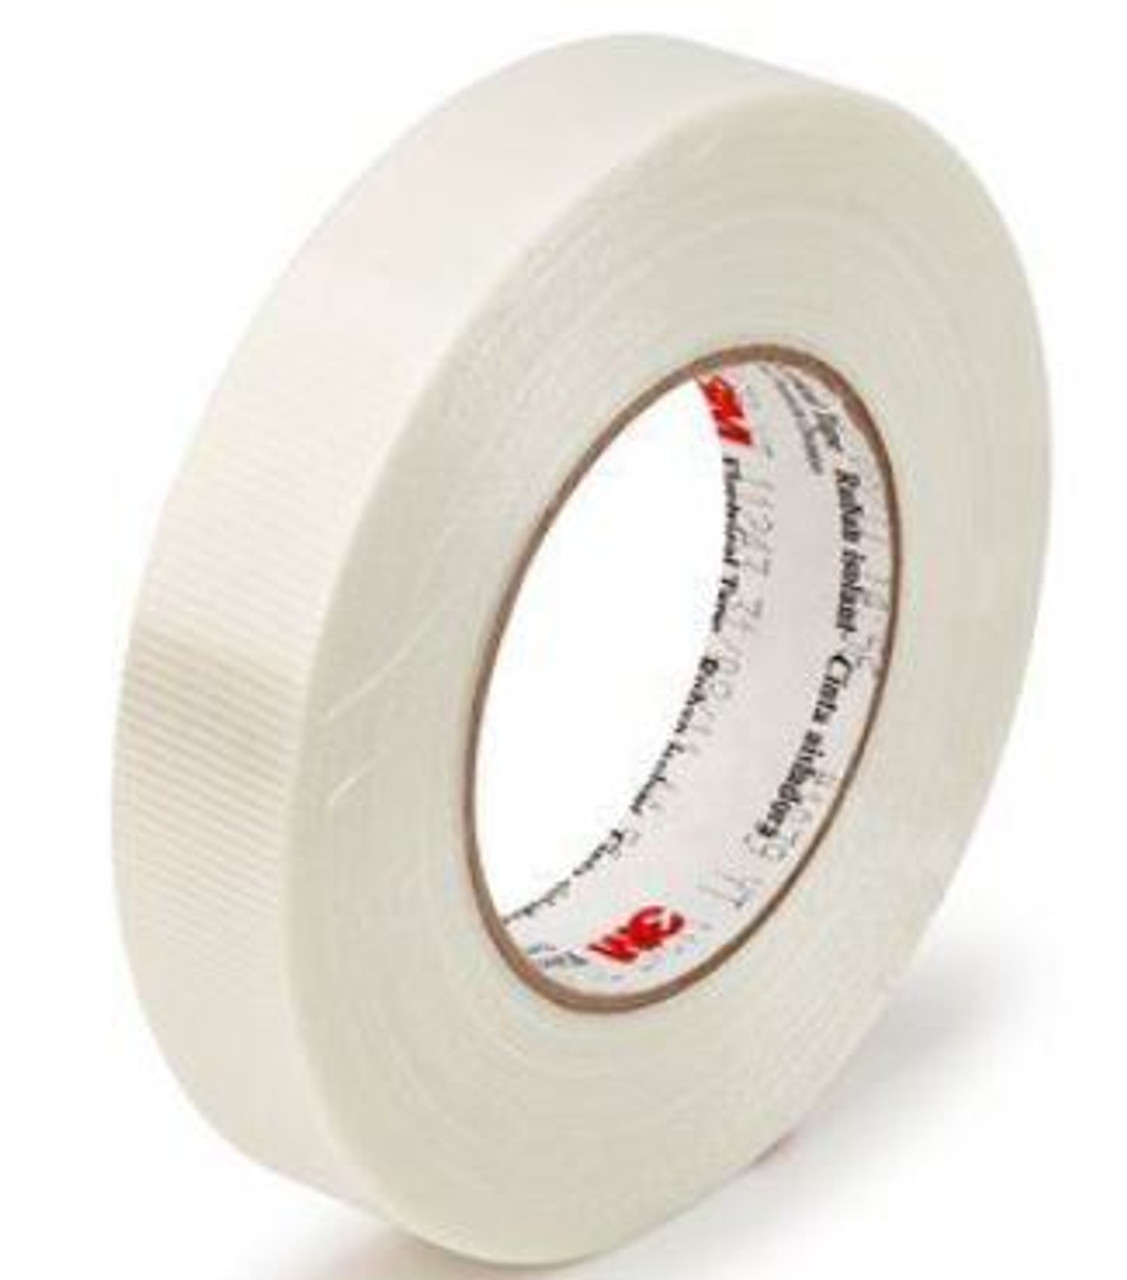 3M Scotch Glass Cloth Electrical Tape 1/2 in x 66 ft:Facility Safety and